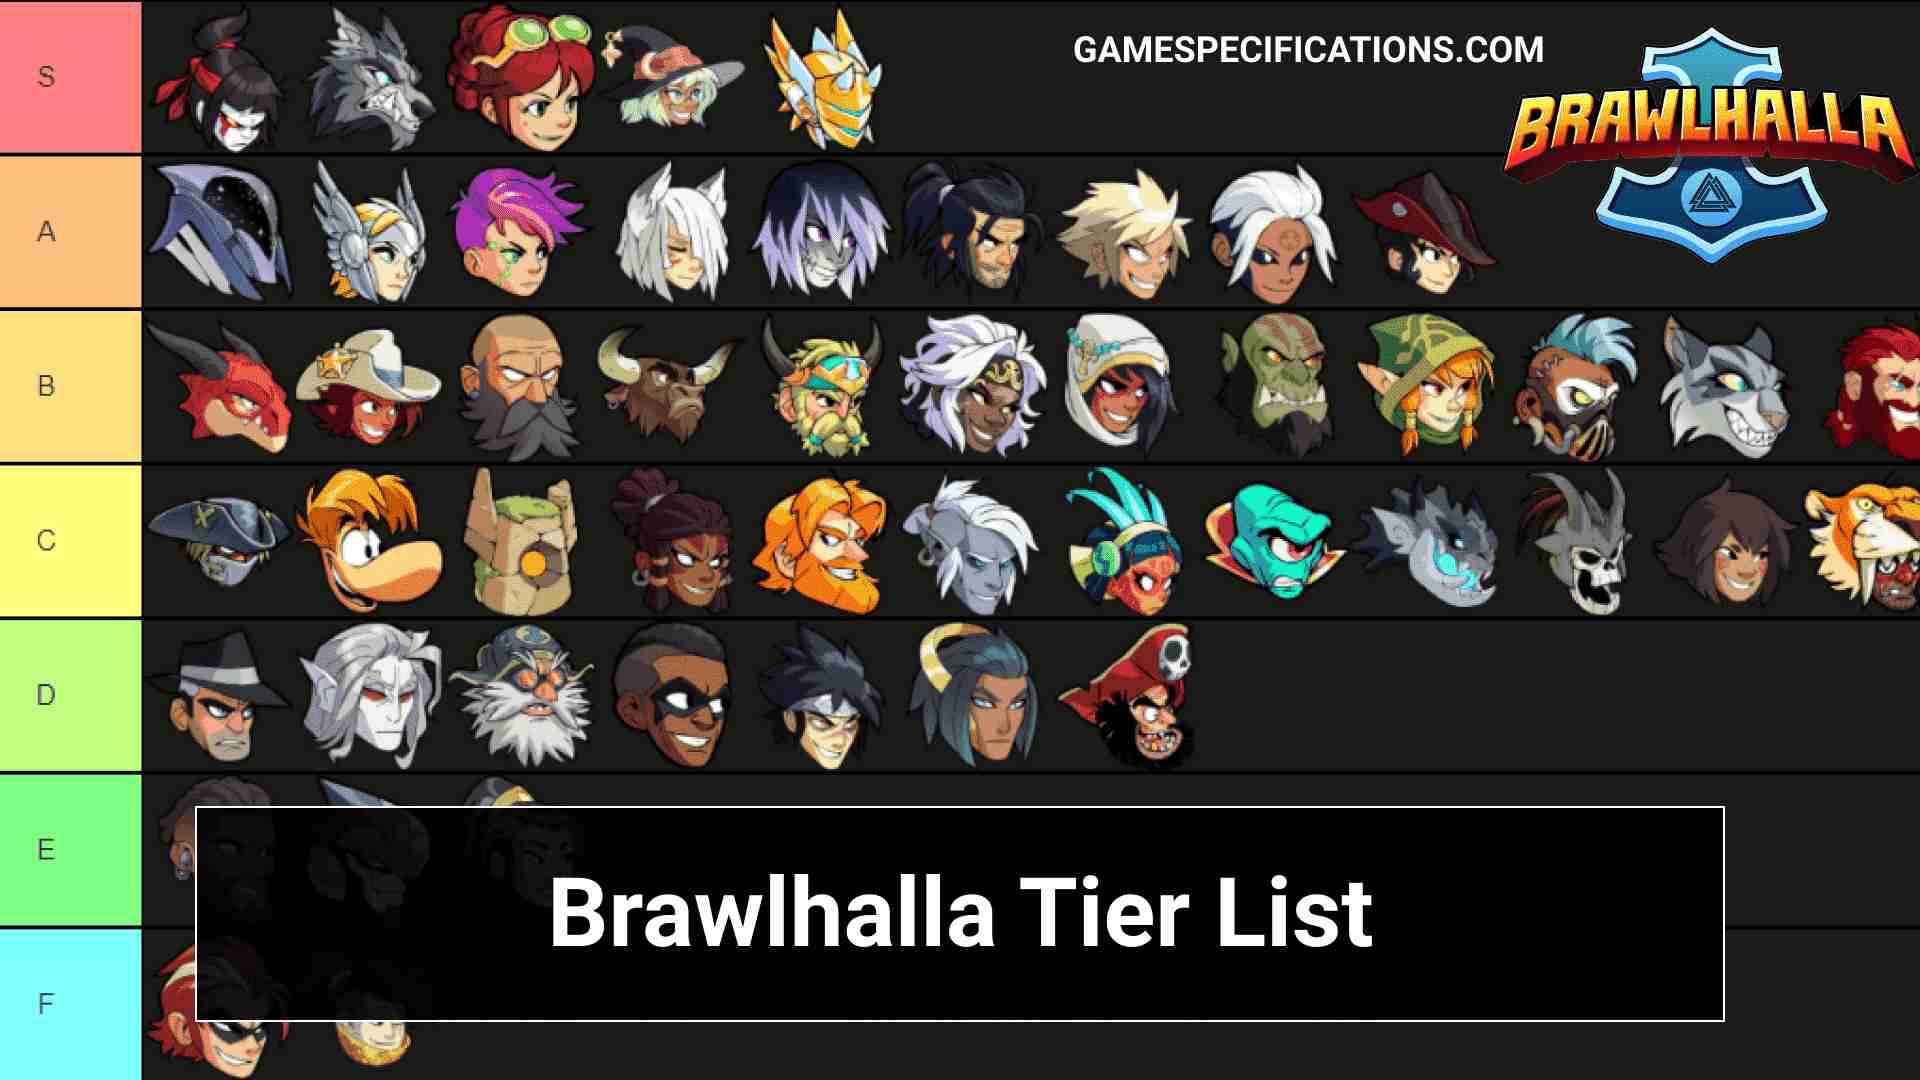 Brawlhalla Tier List | Gain An Upper Hand By Picking The Powerful Characters